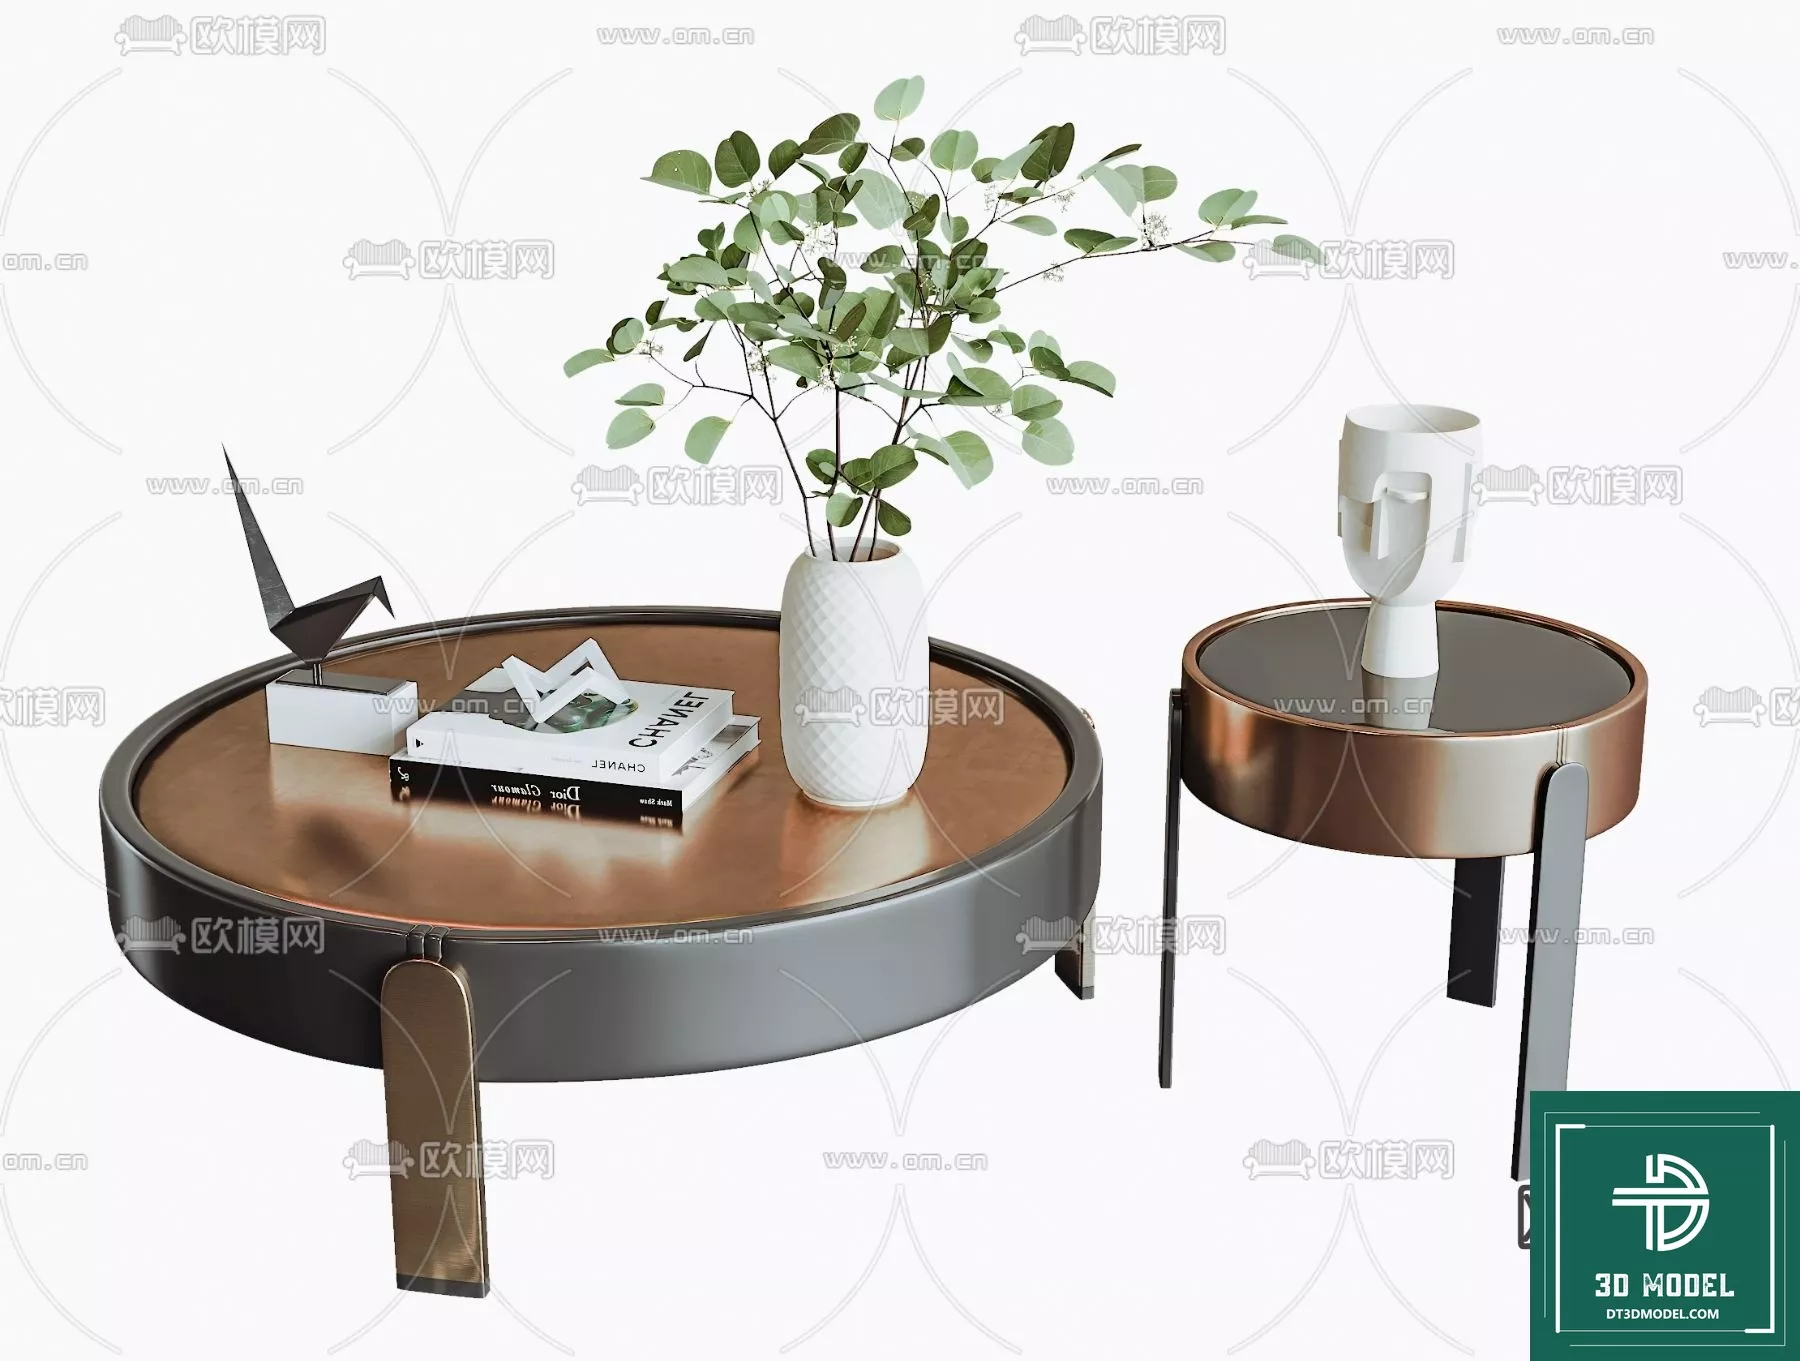 MODERN TEA TABLE - SKETCHUP 3D MODEL - VRAY OR ENSCAPE - ID15007